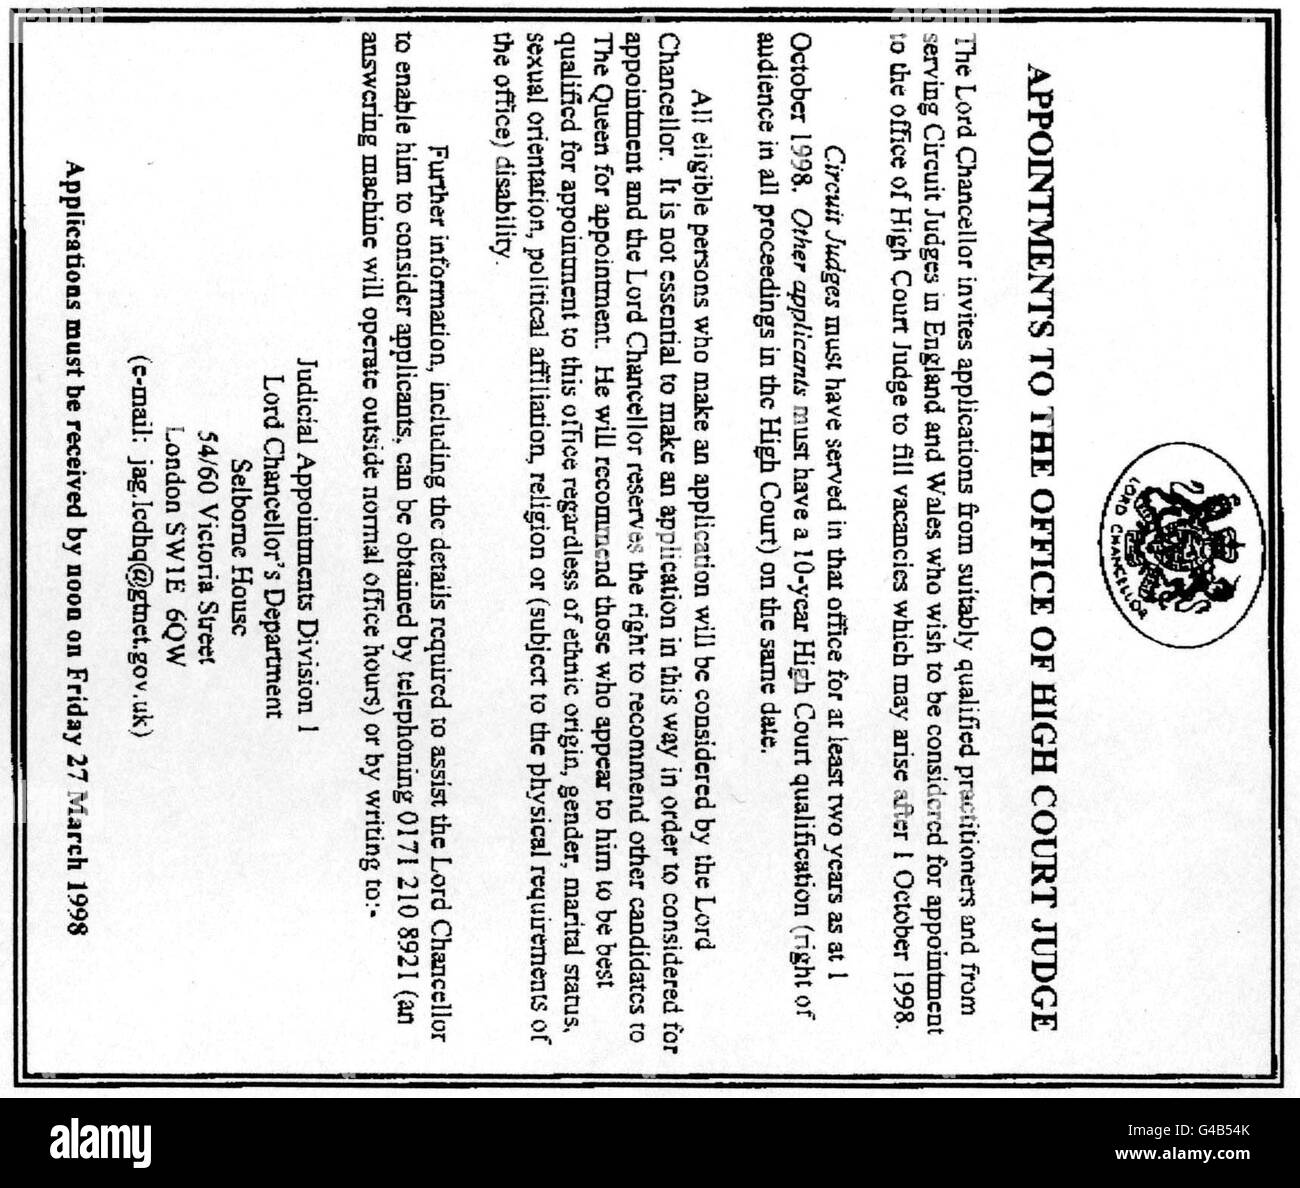 A copy of the first advertisement for appointment to the High Court Bench which will appear in the Law section of The Times tomorrow (24.2.98) for vacancies which arise after October 1, 1998. The move to advertise senior judicial posts is part of an opening out of the whole appointments process under the Lord Chancellor, Lord Irvine of Lairg. See PA story LEGAL Judges. PA Picture. Stock Photo